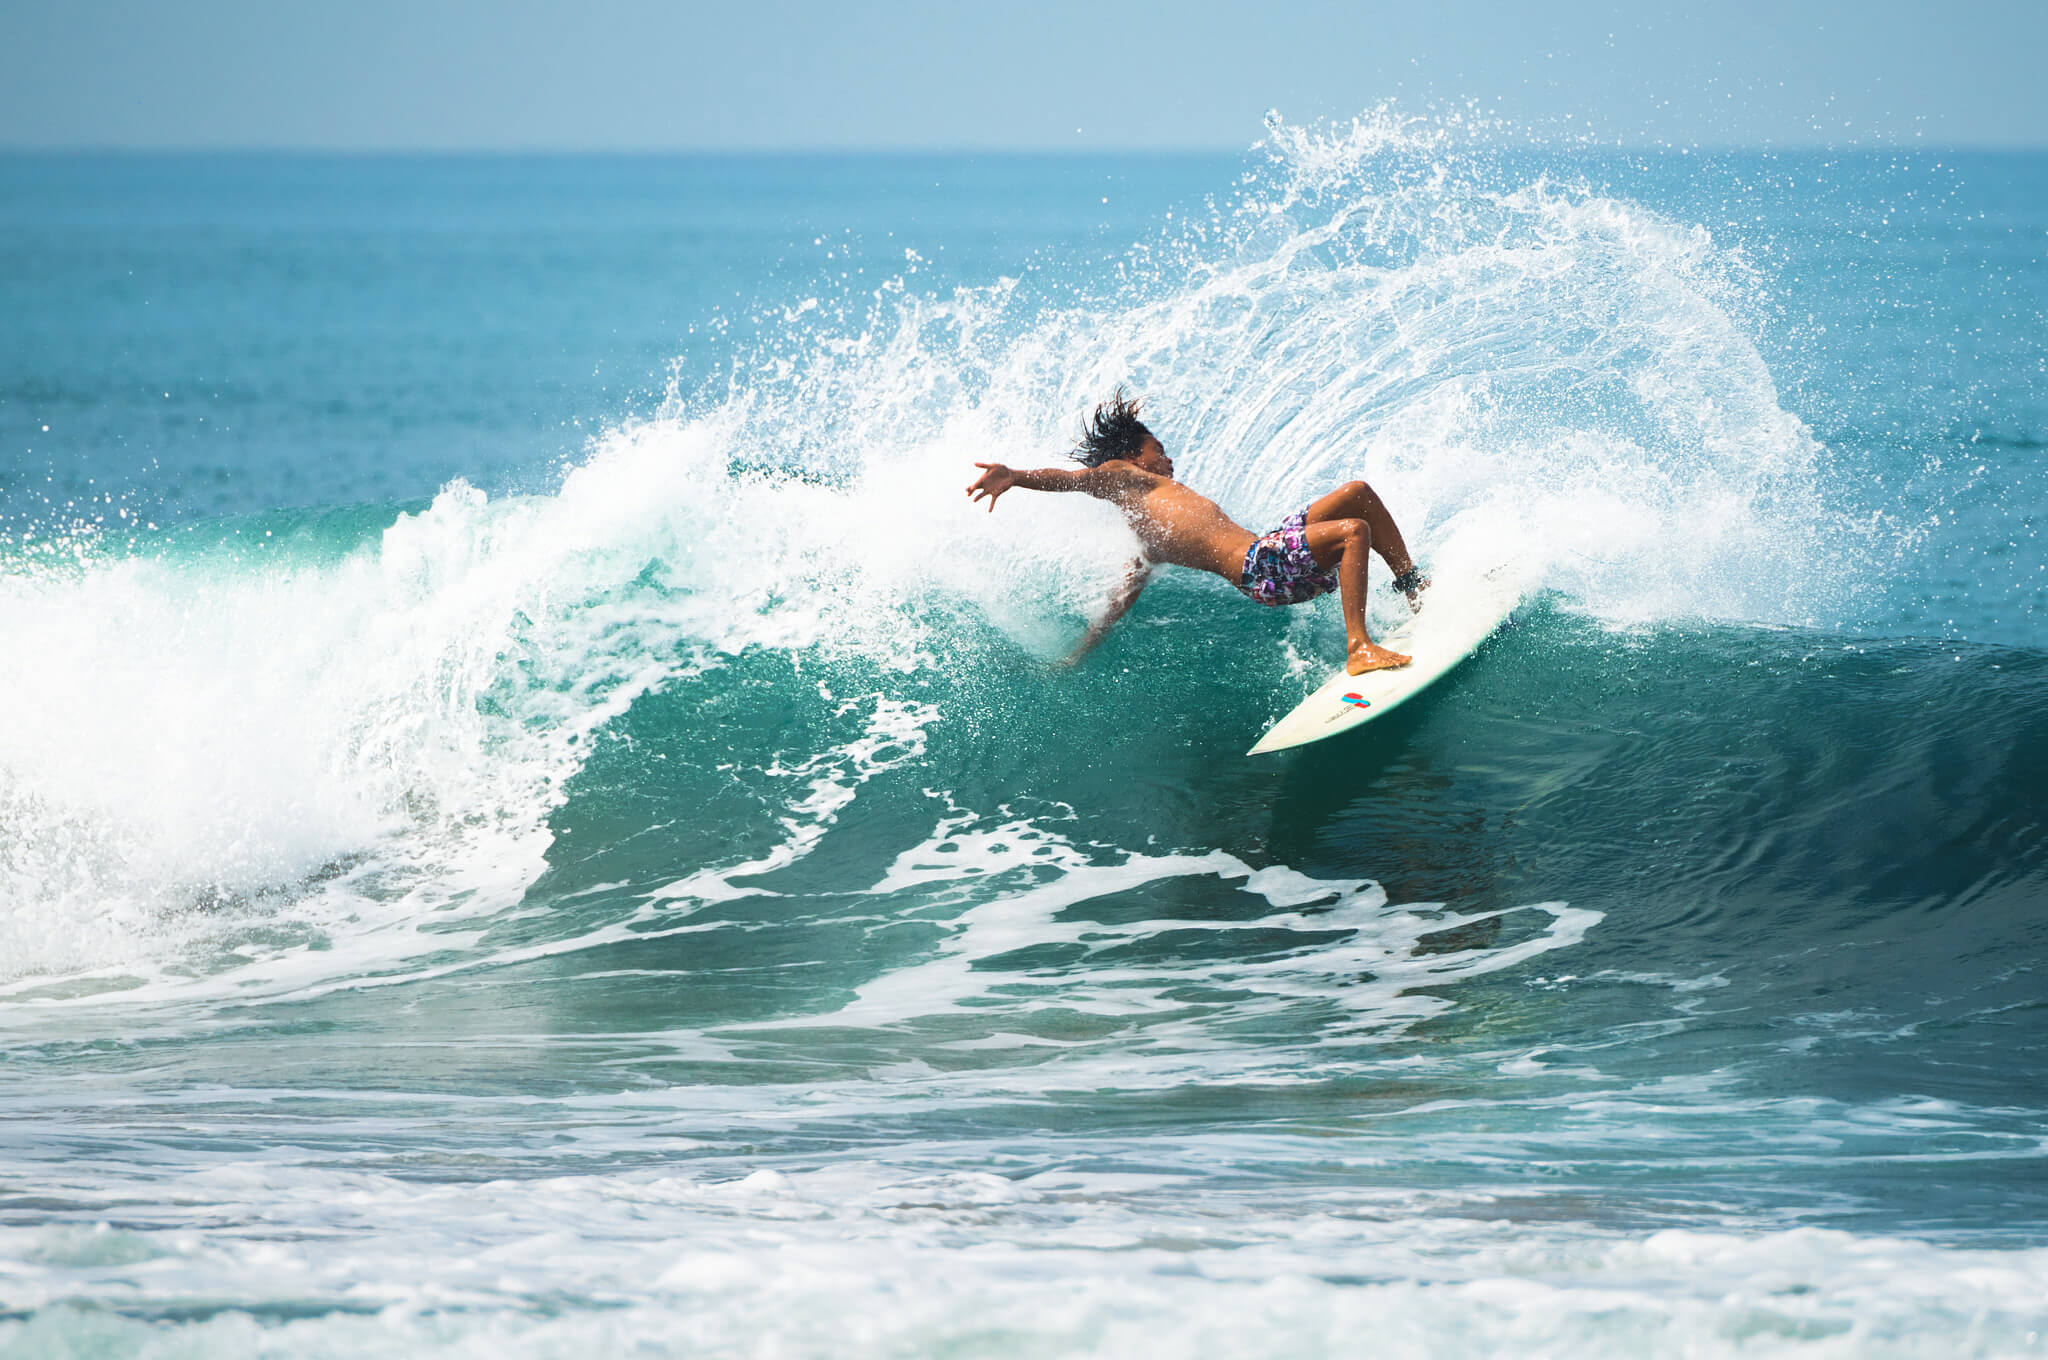 best things to do in Bali: Surfing at Canggu Bali